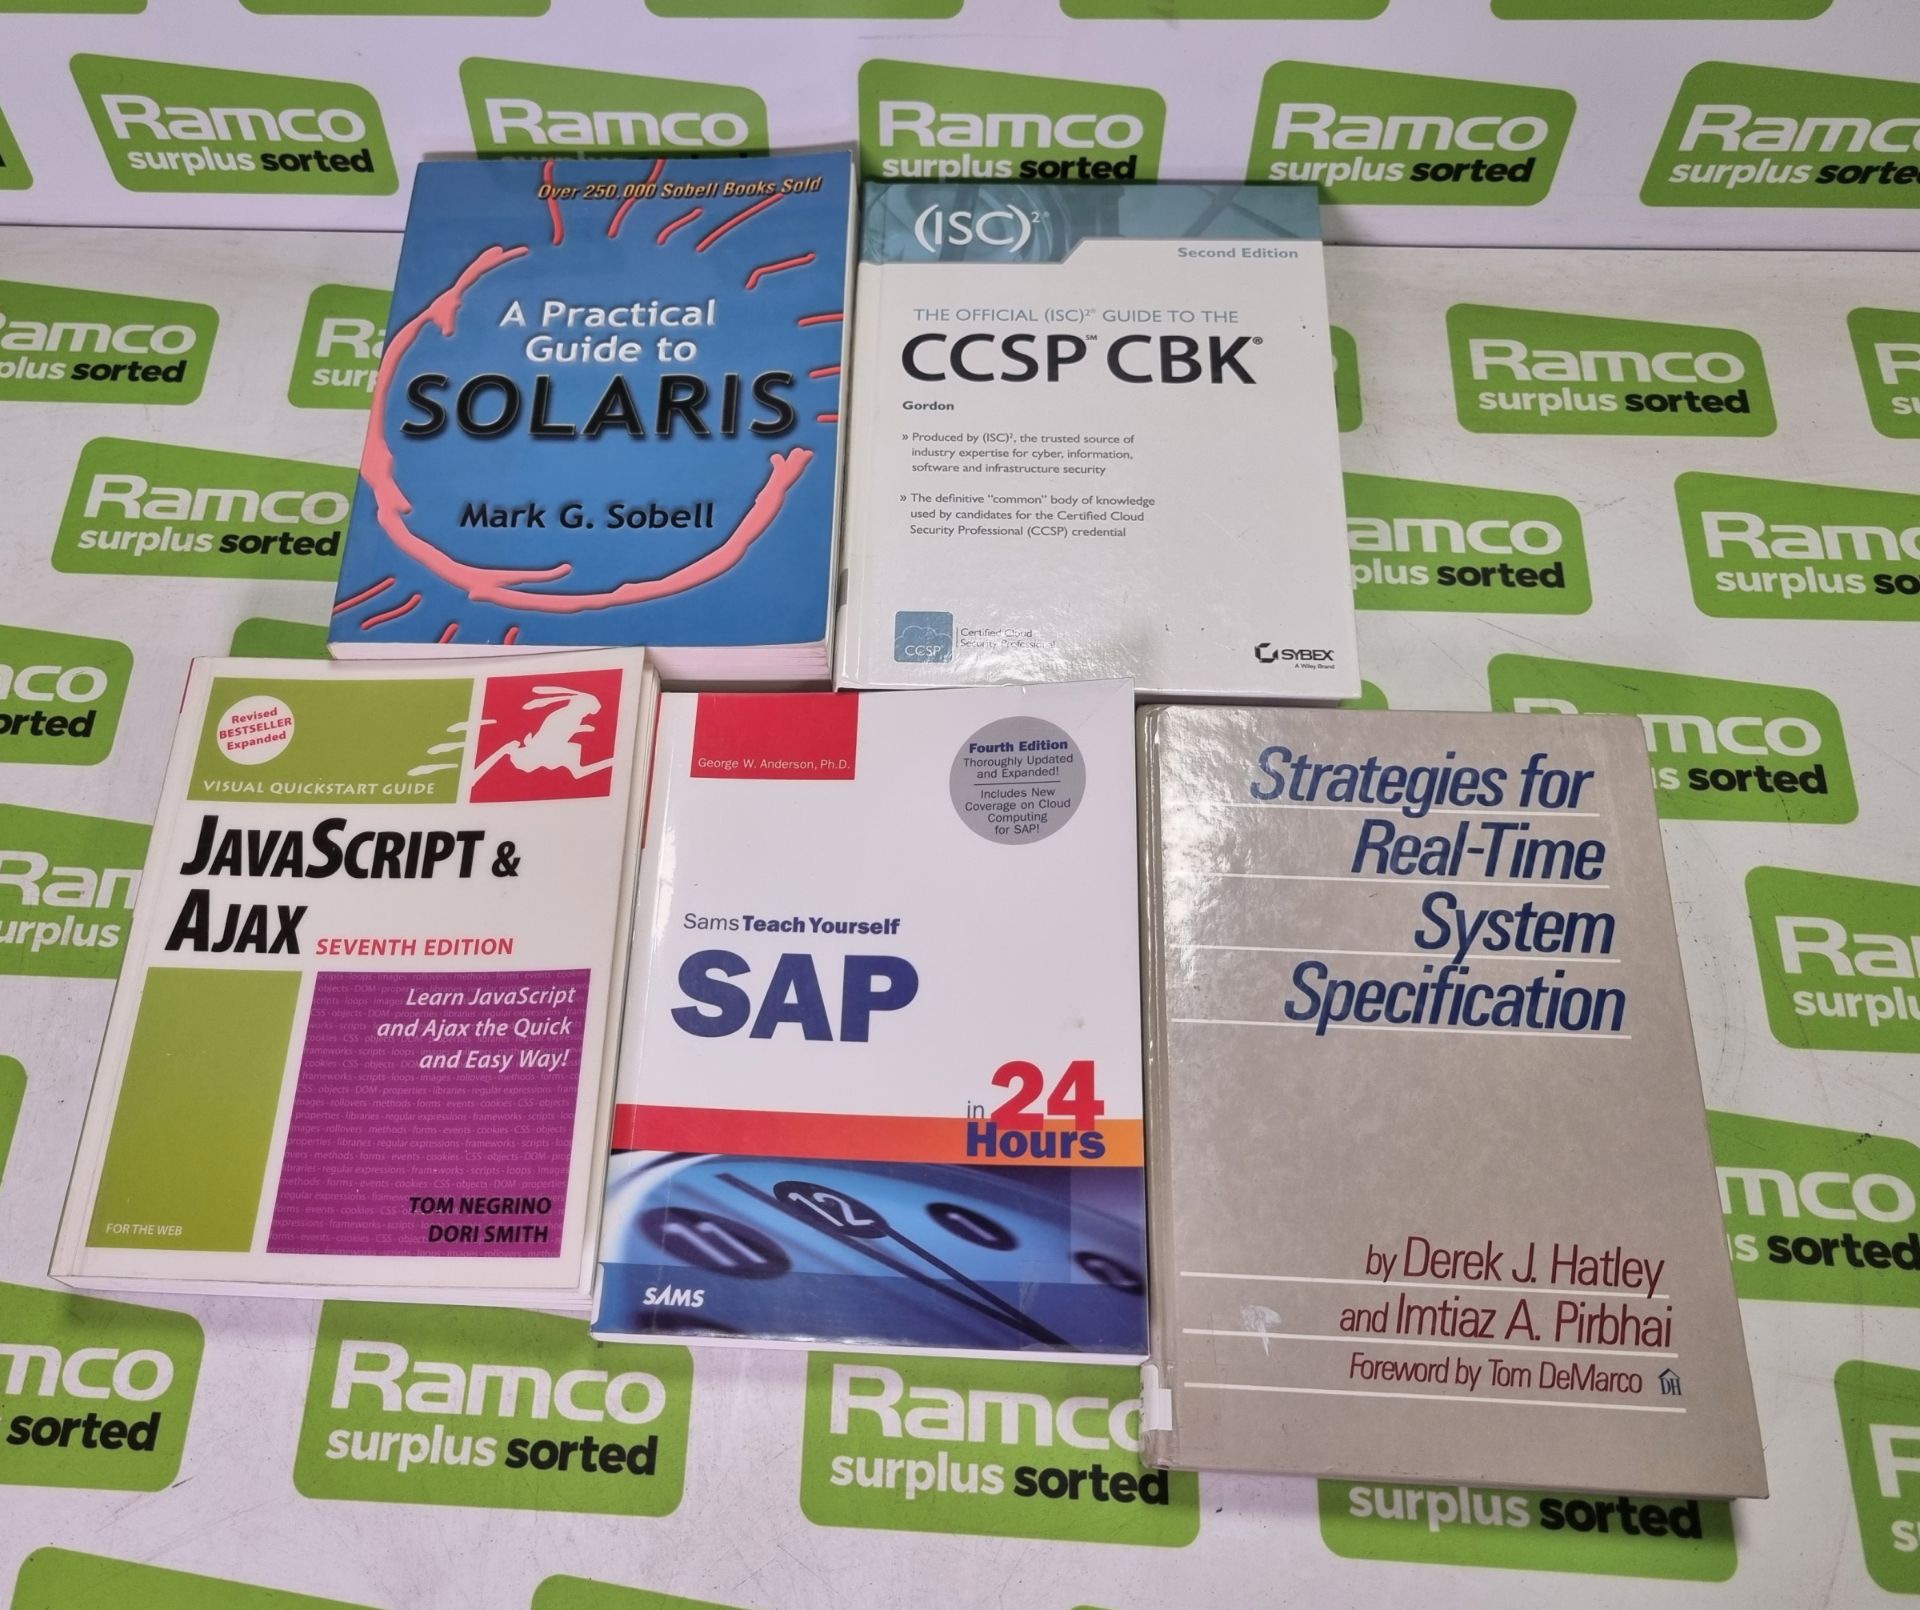 A Practical Guide to Solaris, Sams Teach Yourself SAP in 24 Hours, Javascript & Ajax Seventh Edition - Image 2 of 12